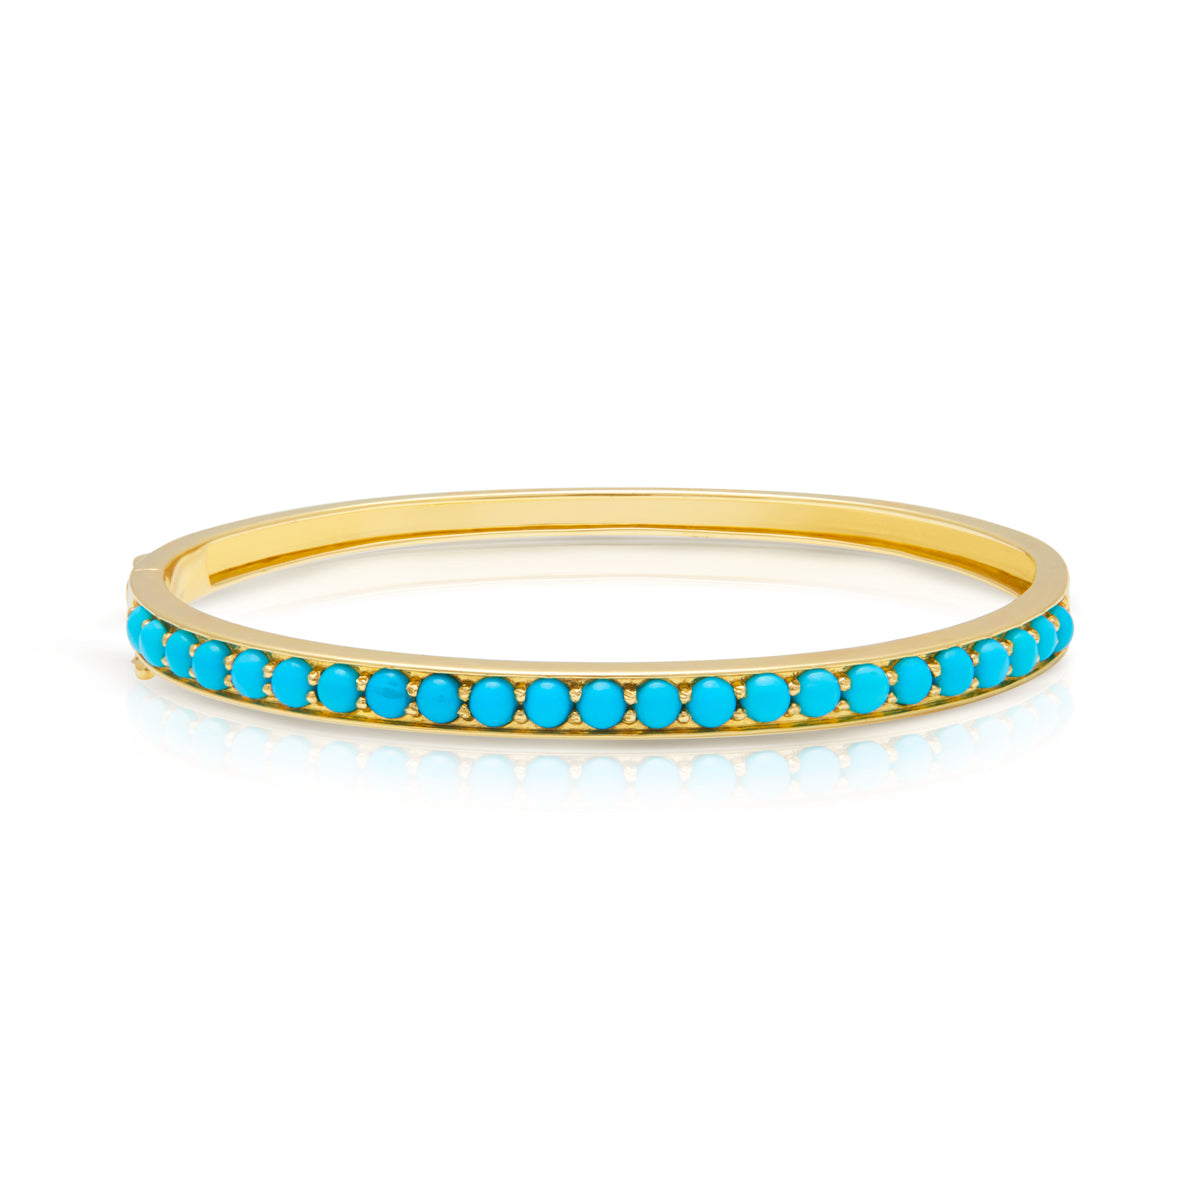 Delphi Gemstone Friendship Bracelet in 18ct Gold Vermeil on Sterling Silver  and Turquoise | Jewellery by Monica Vinader